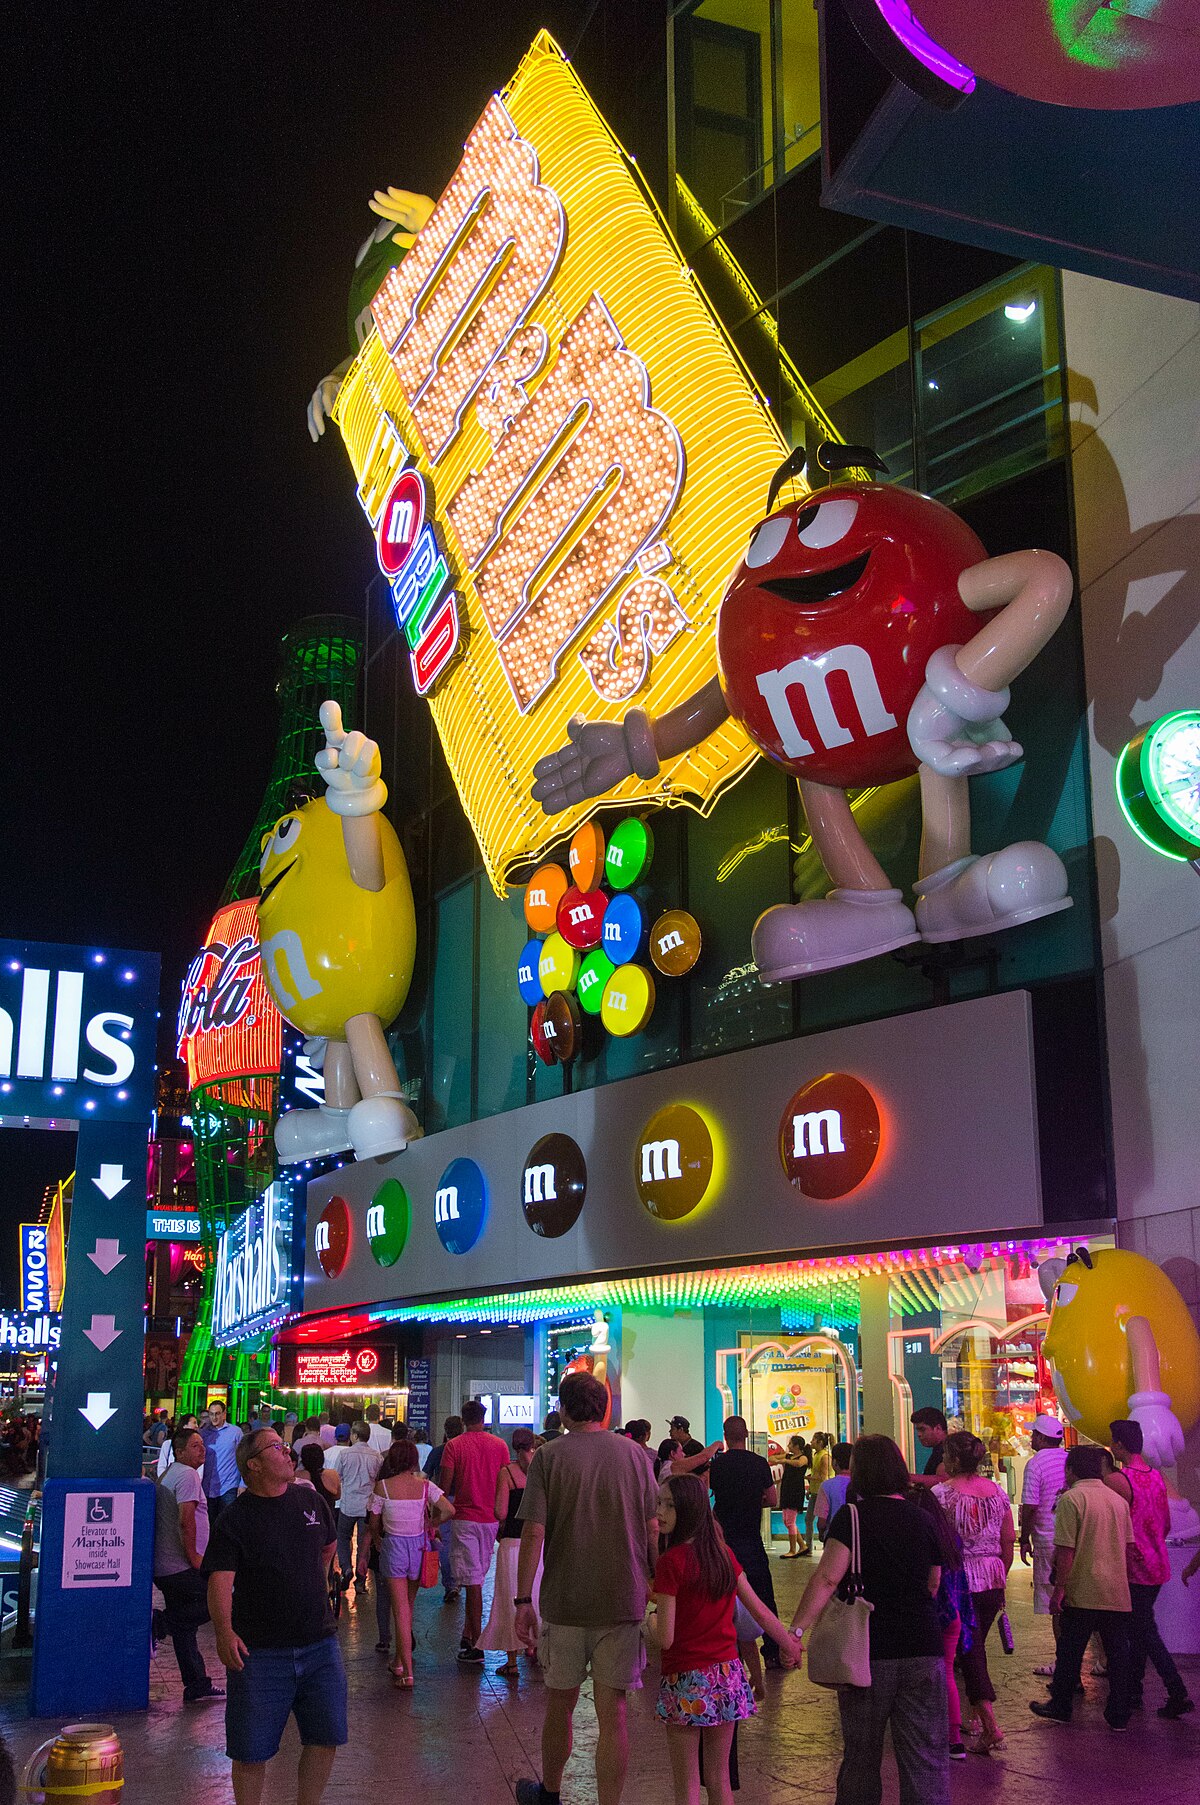 M&M's WORLDS BIGGEST CANDY STORE!